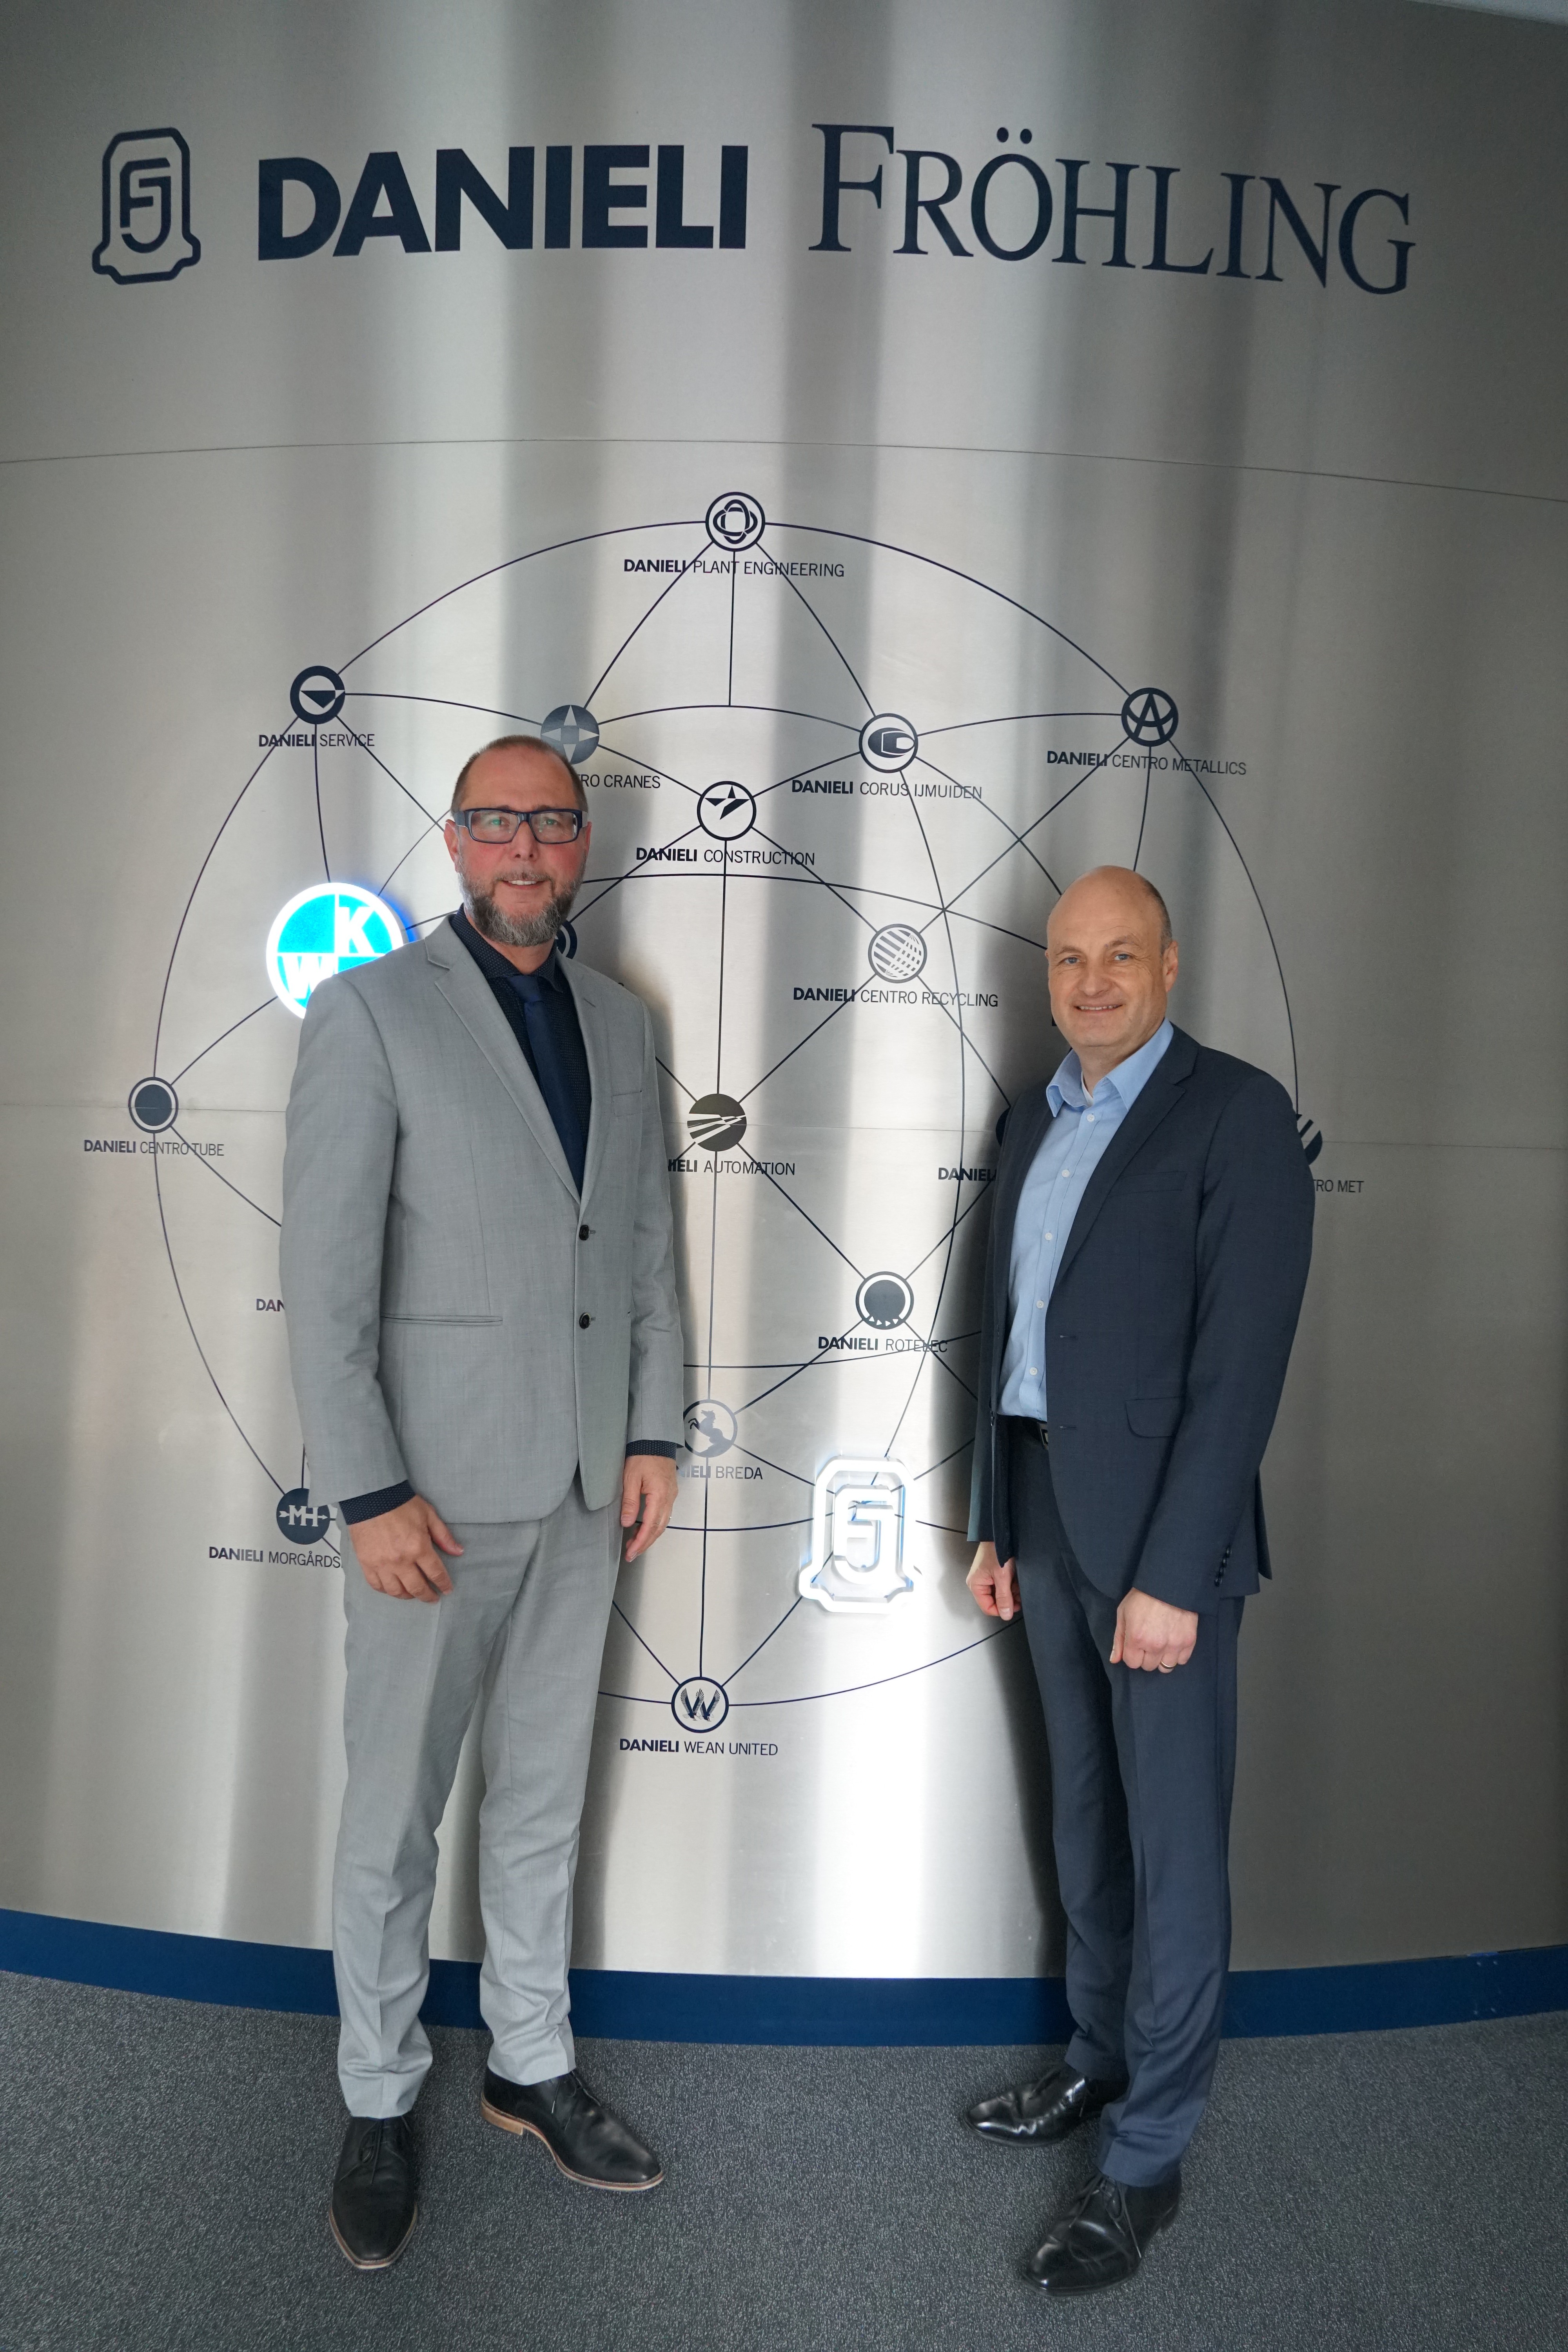 (From left) Jörg Schröder, executive vice-president of DANIELI for Central Europe and managing director of DANIELI Germany; and Elmar Weber, executive vice-president